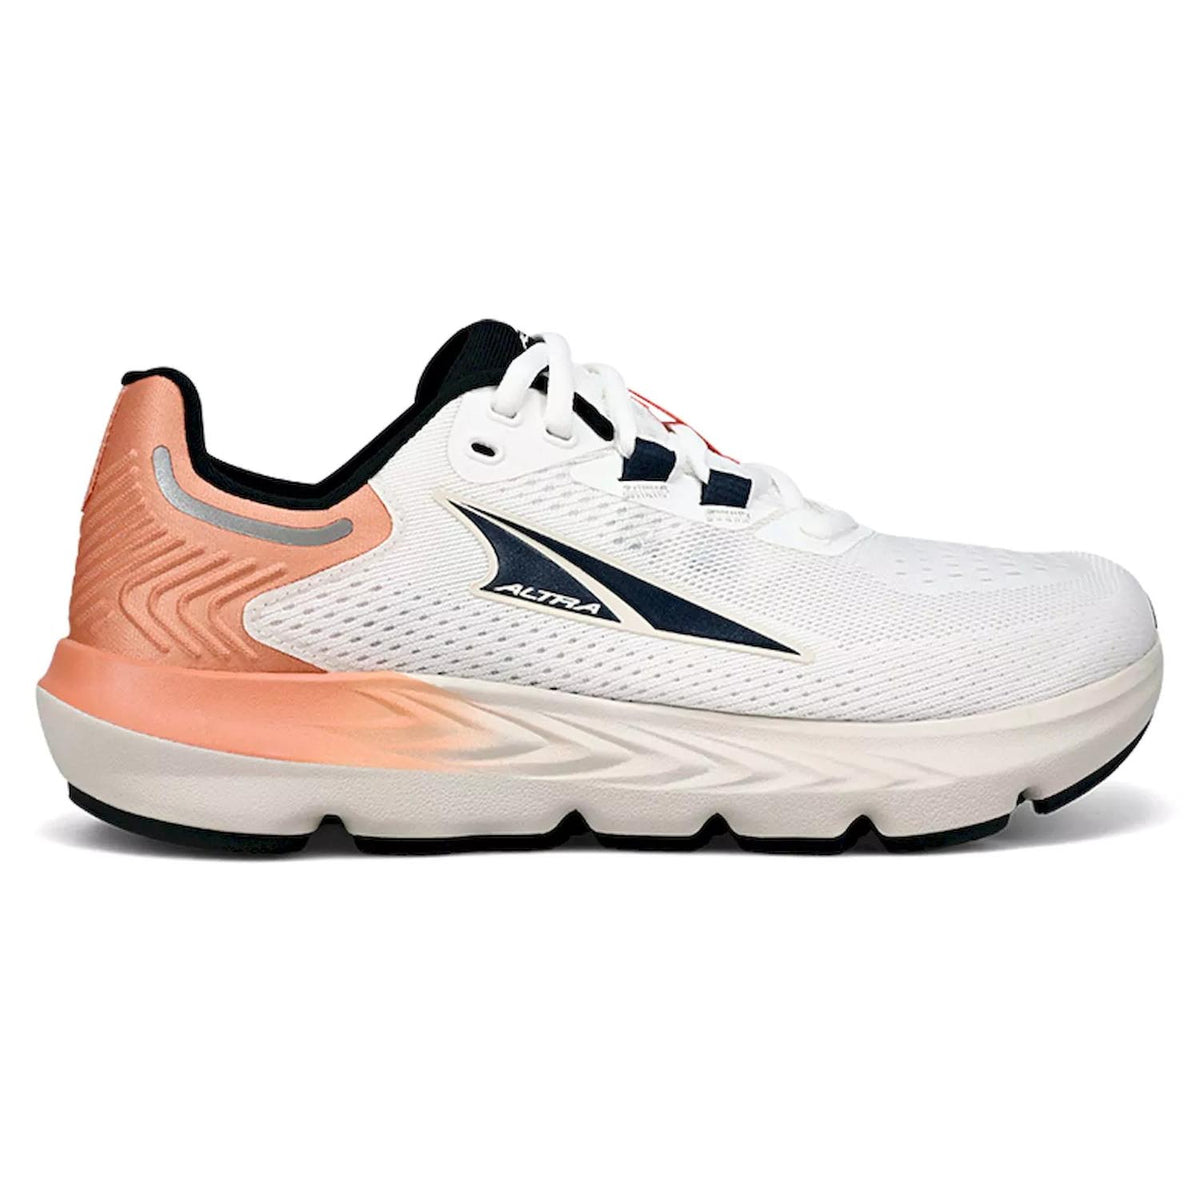 Altra Provision 7 Womens Running Trainer